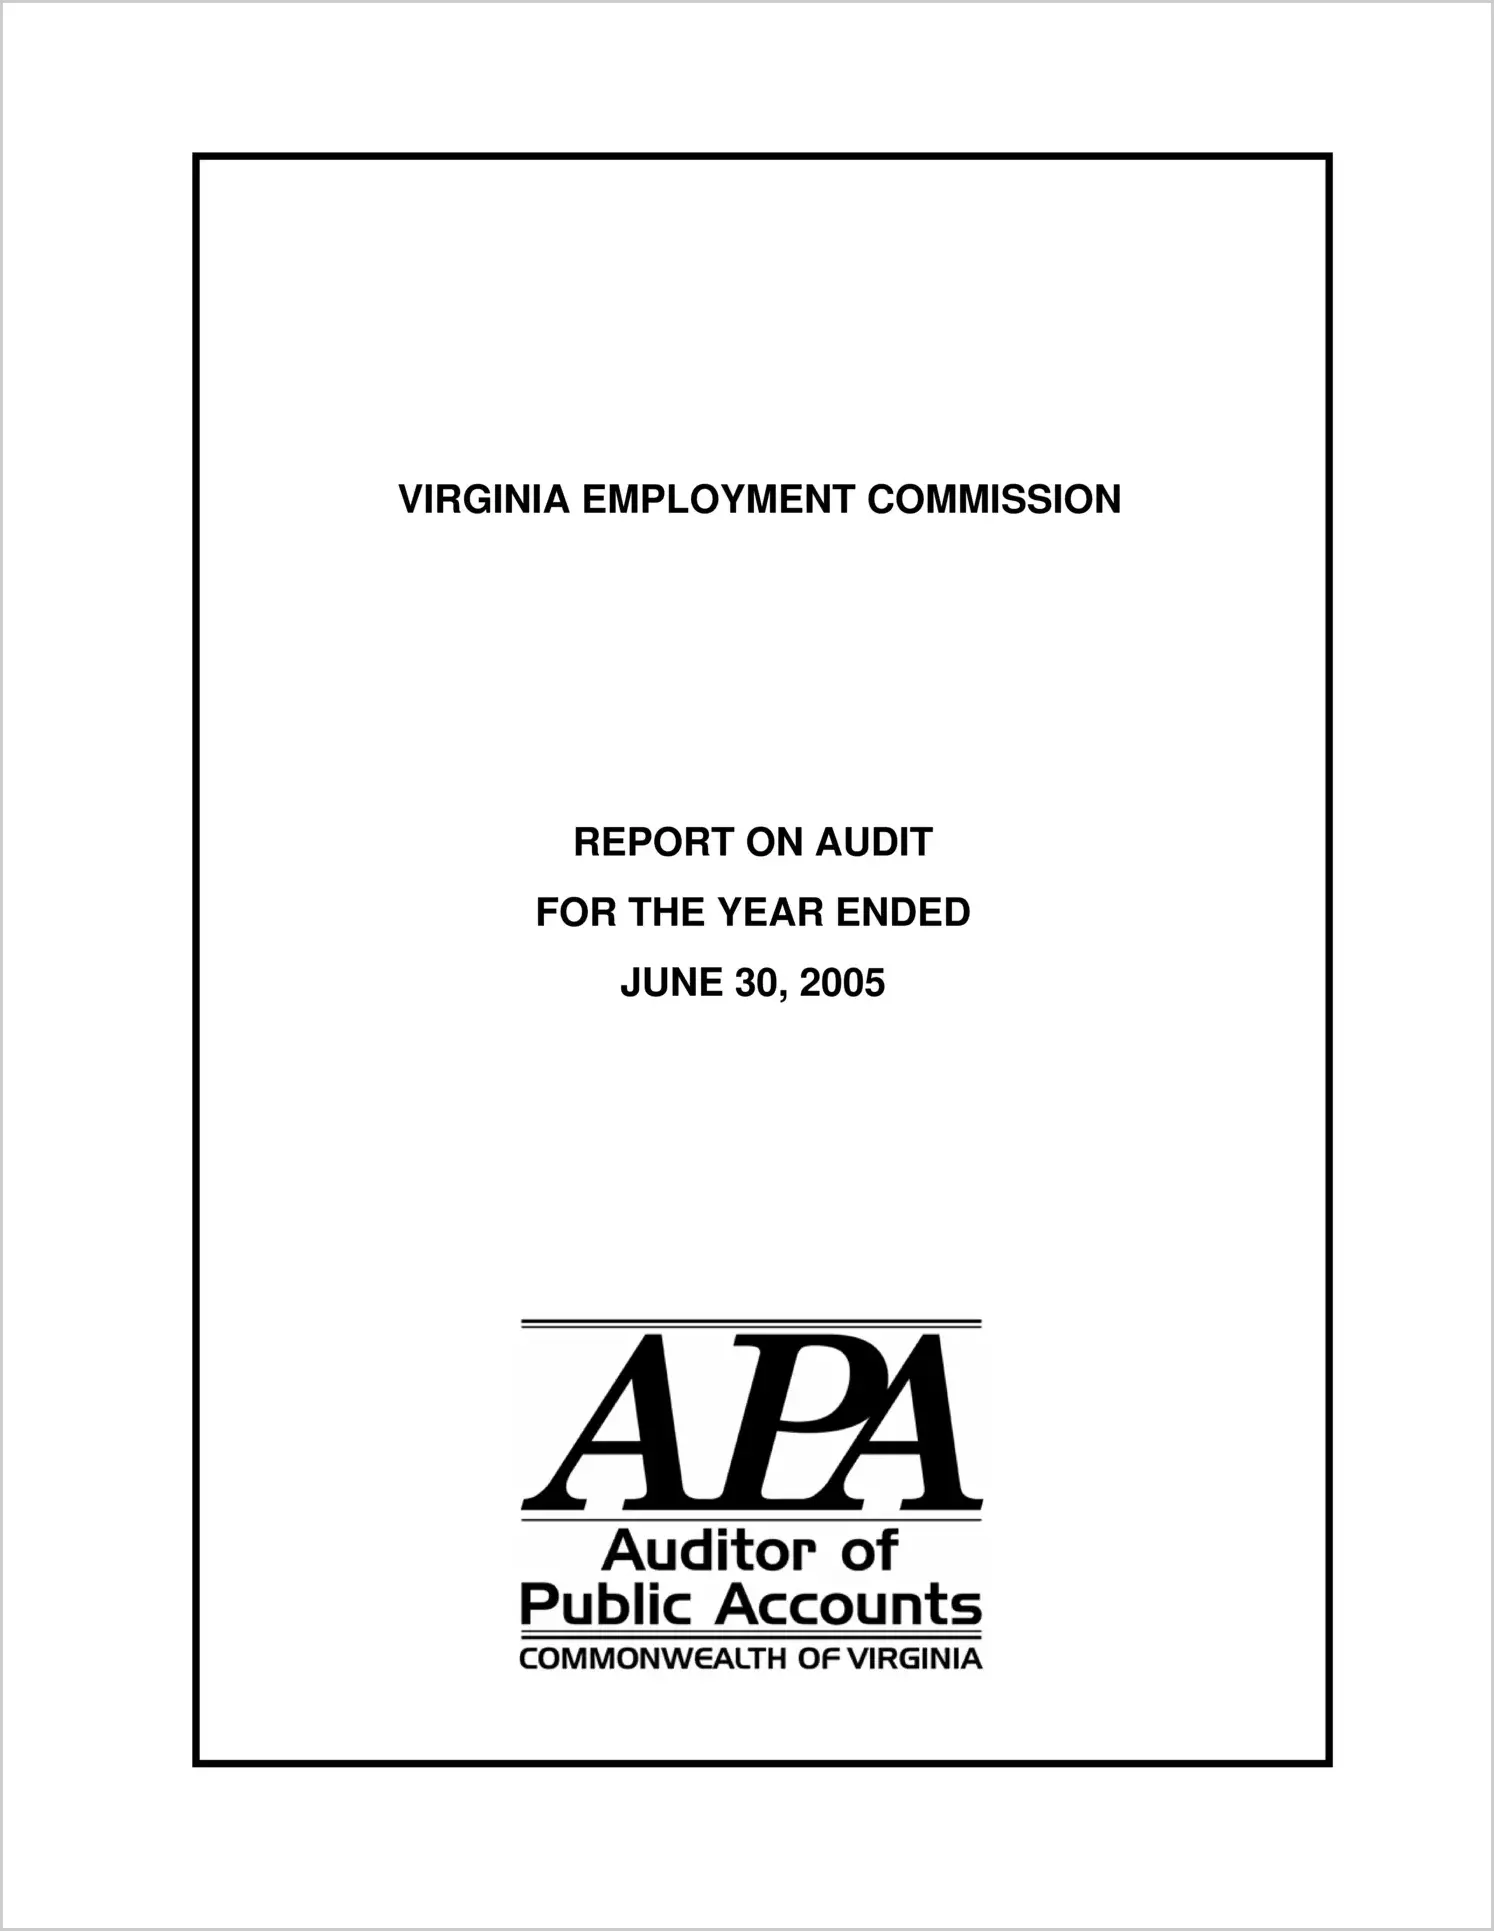 Virginia Employment Commission for the year ended June 30, 2005